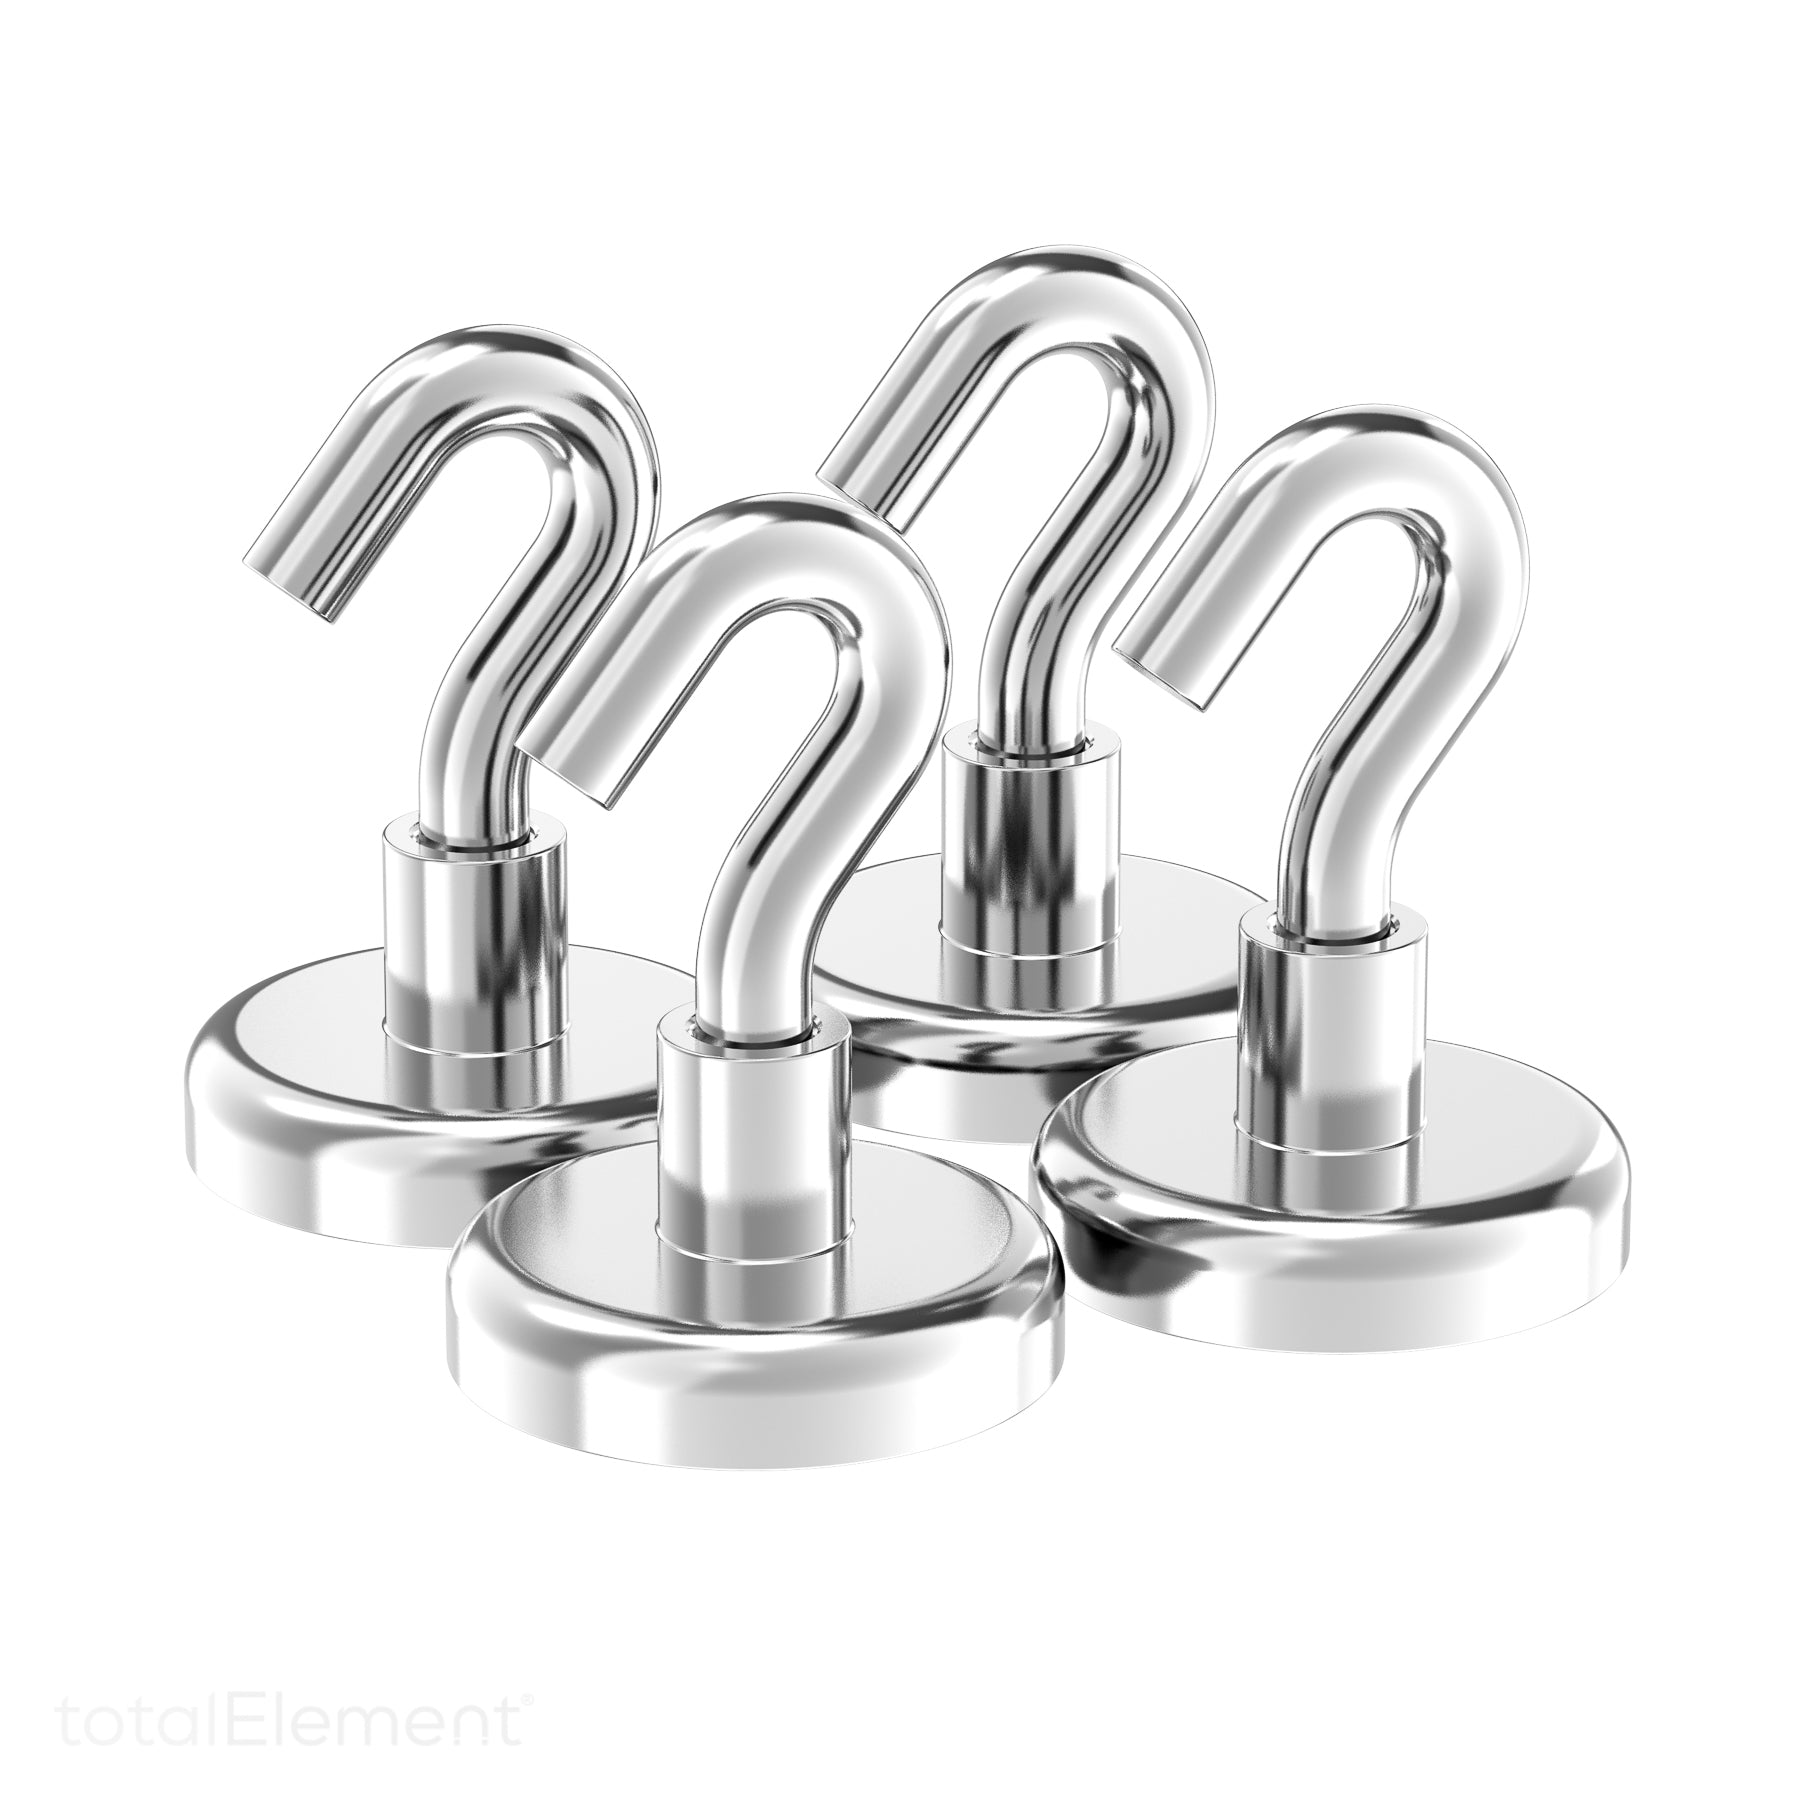 Catalogue of Magnetic Hooks Made from Neodymium